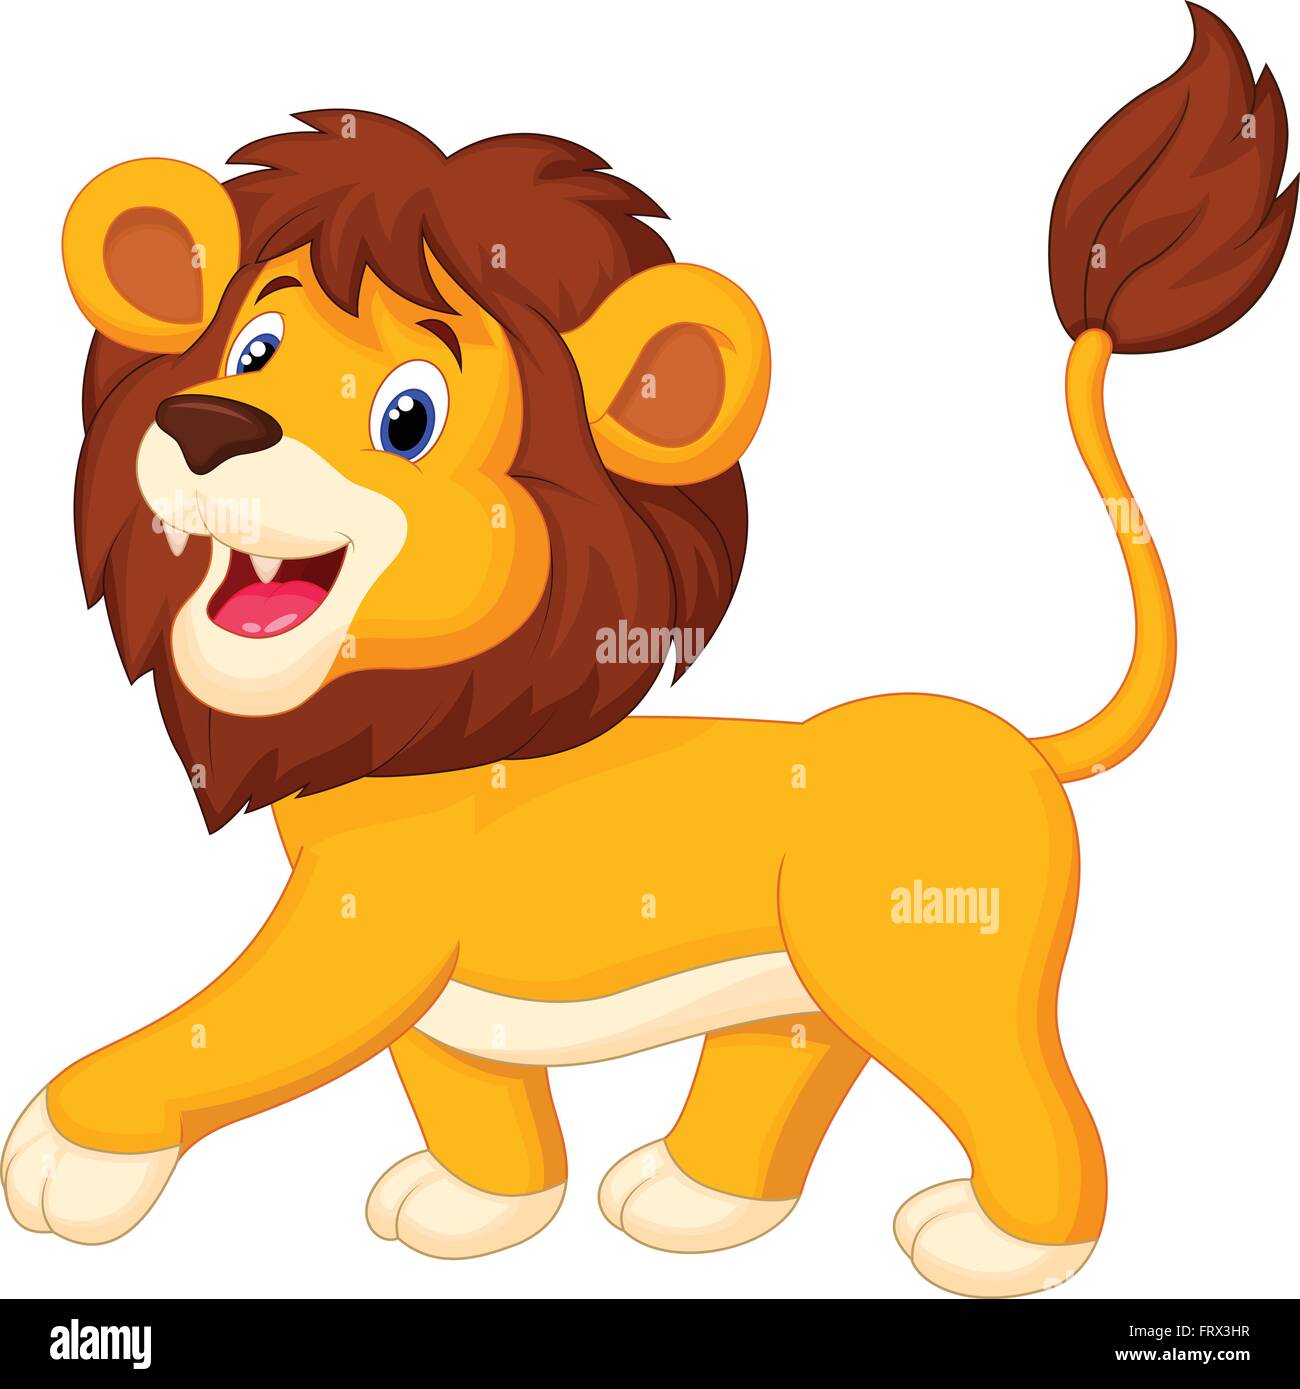 Ultimate Compilation of Lion Cartoon Images in Full 4K: Over 999 ...